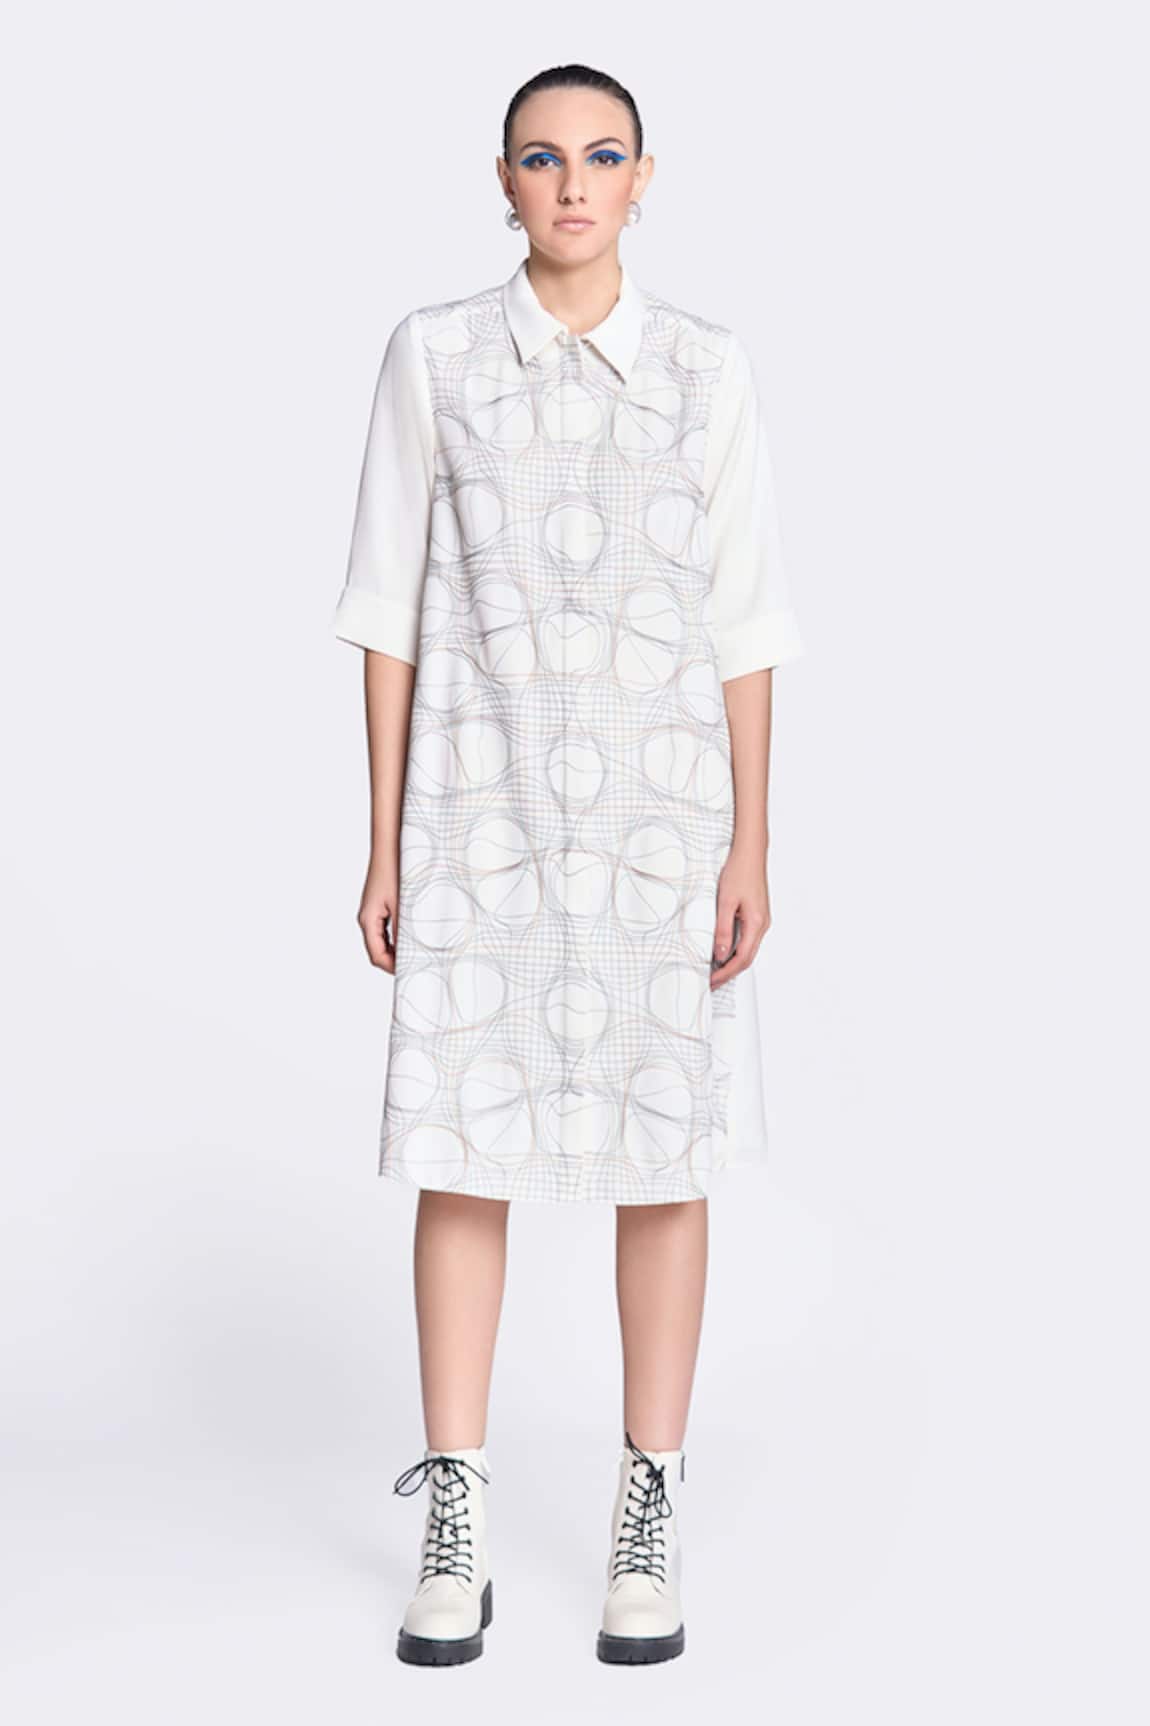 Shahin Mannan Distorted Chequered Embroidered Dress